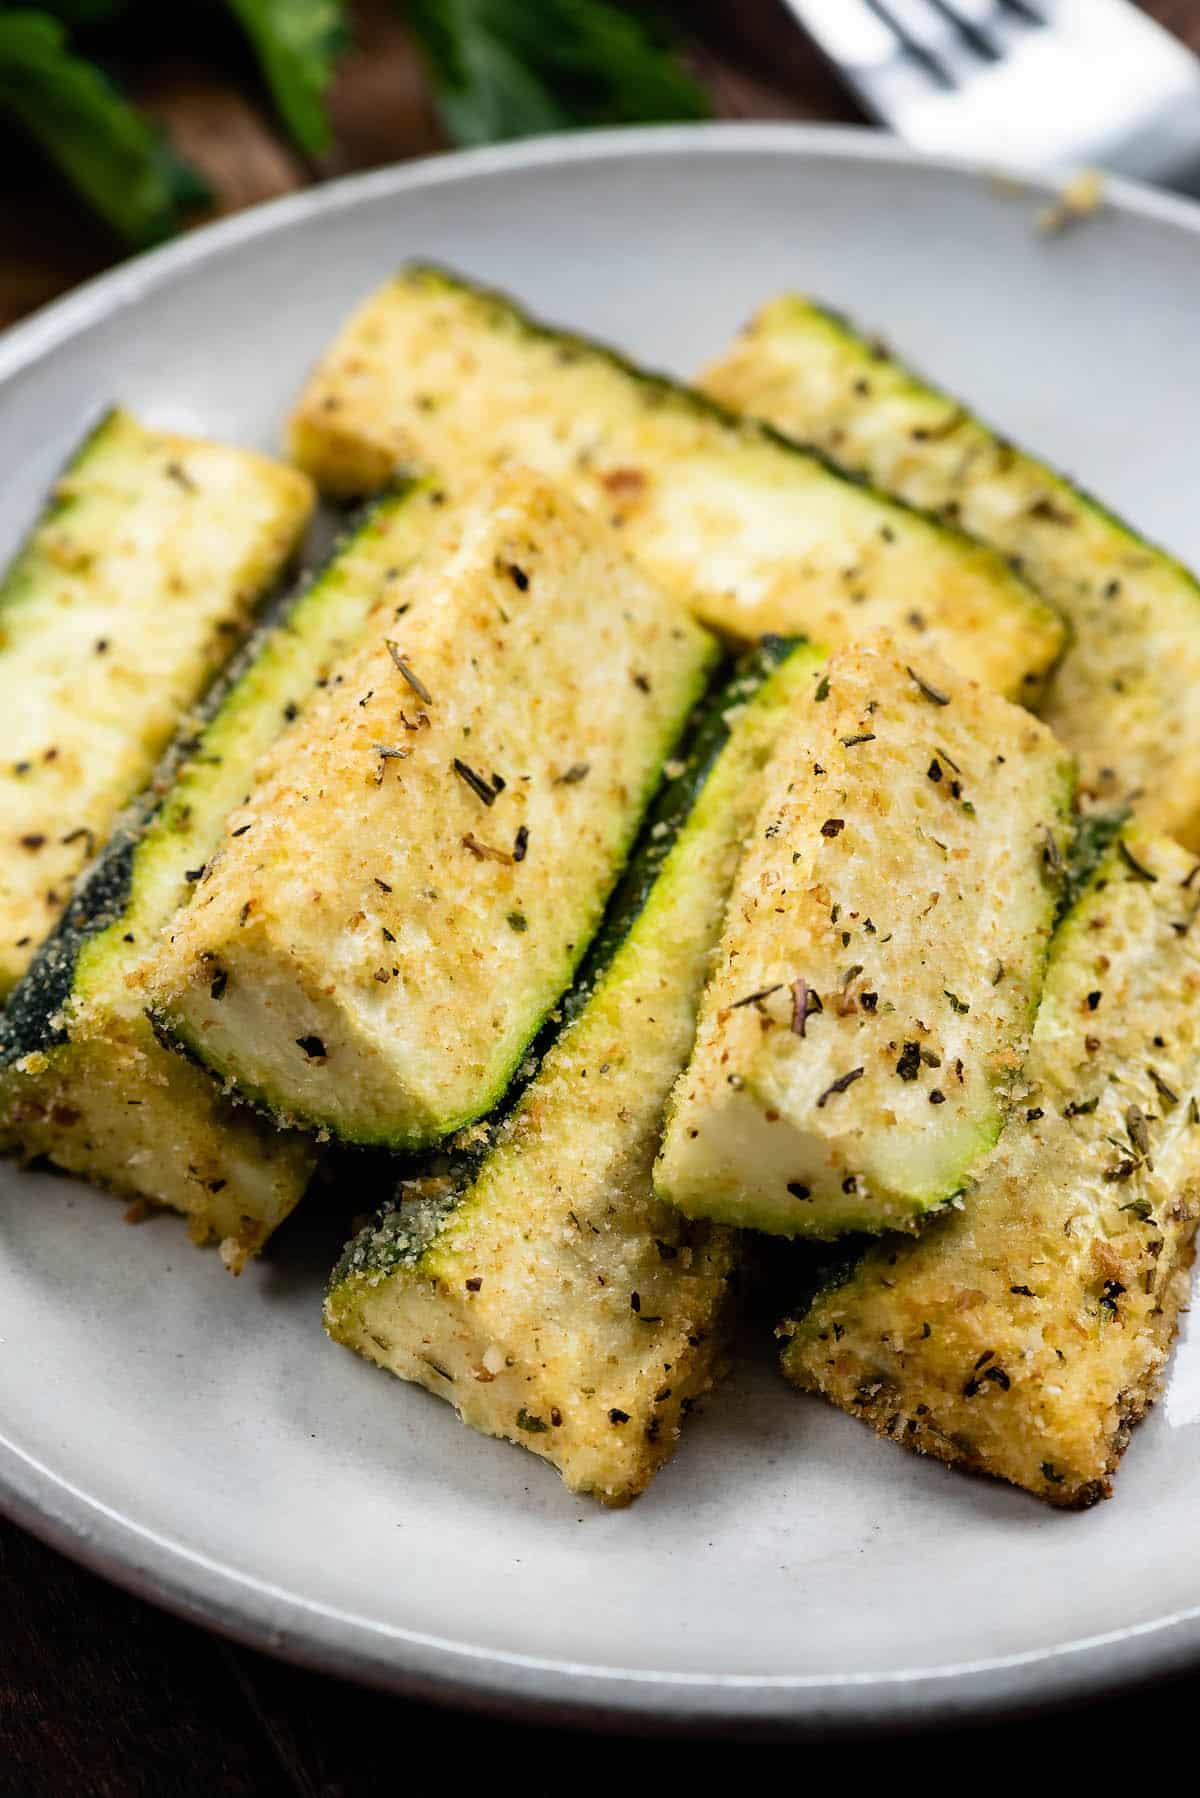 zucchini wedges on white plate.